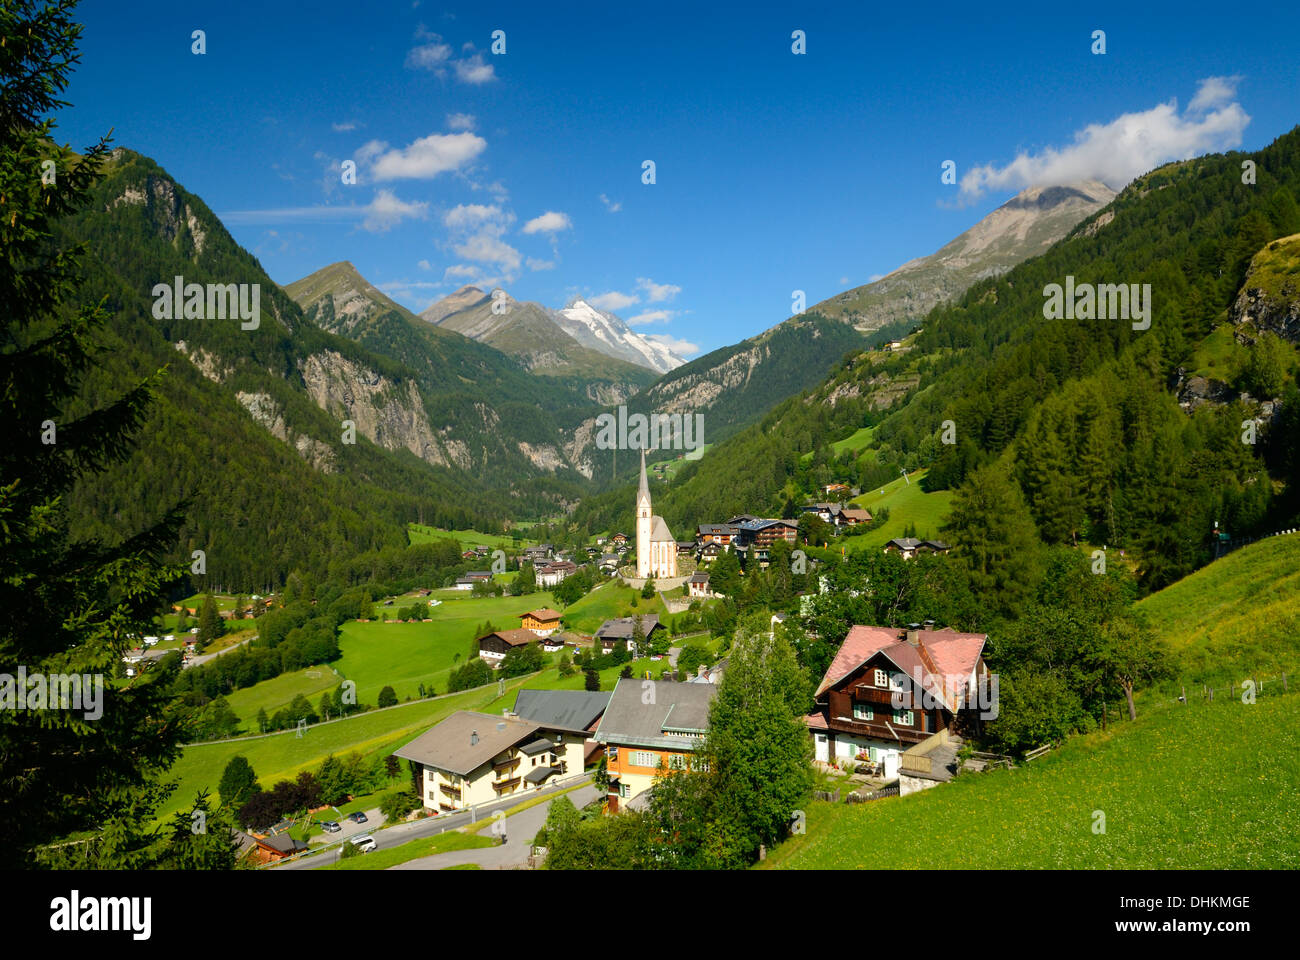 Alpine village Heiligenblut at the foot of the mountain Grossglockner Hohe  Tauern national park Austria Stock Photo - Alamy